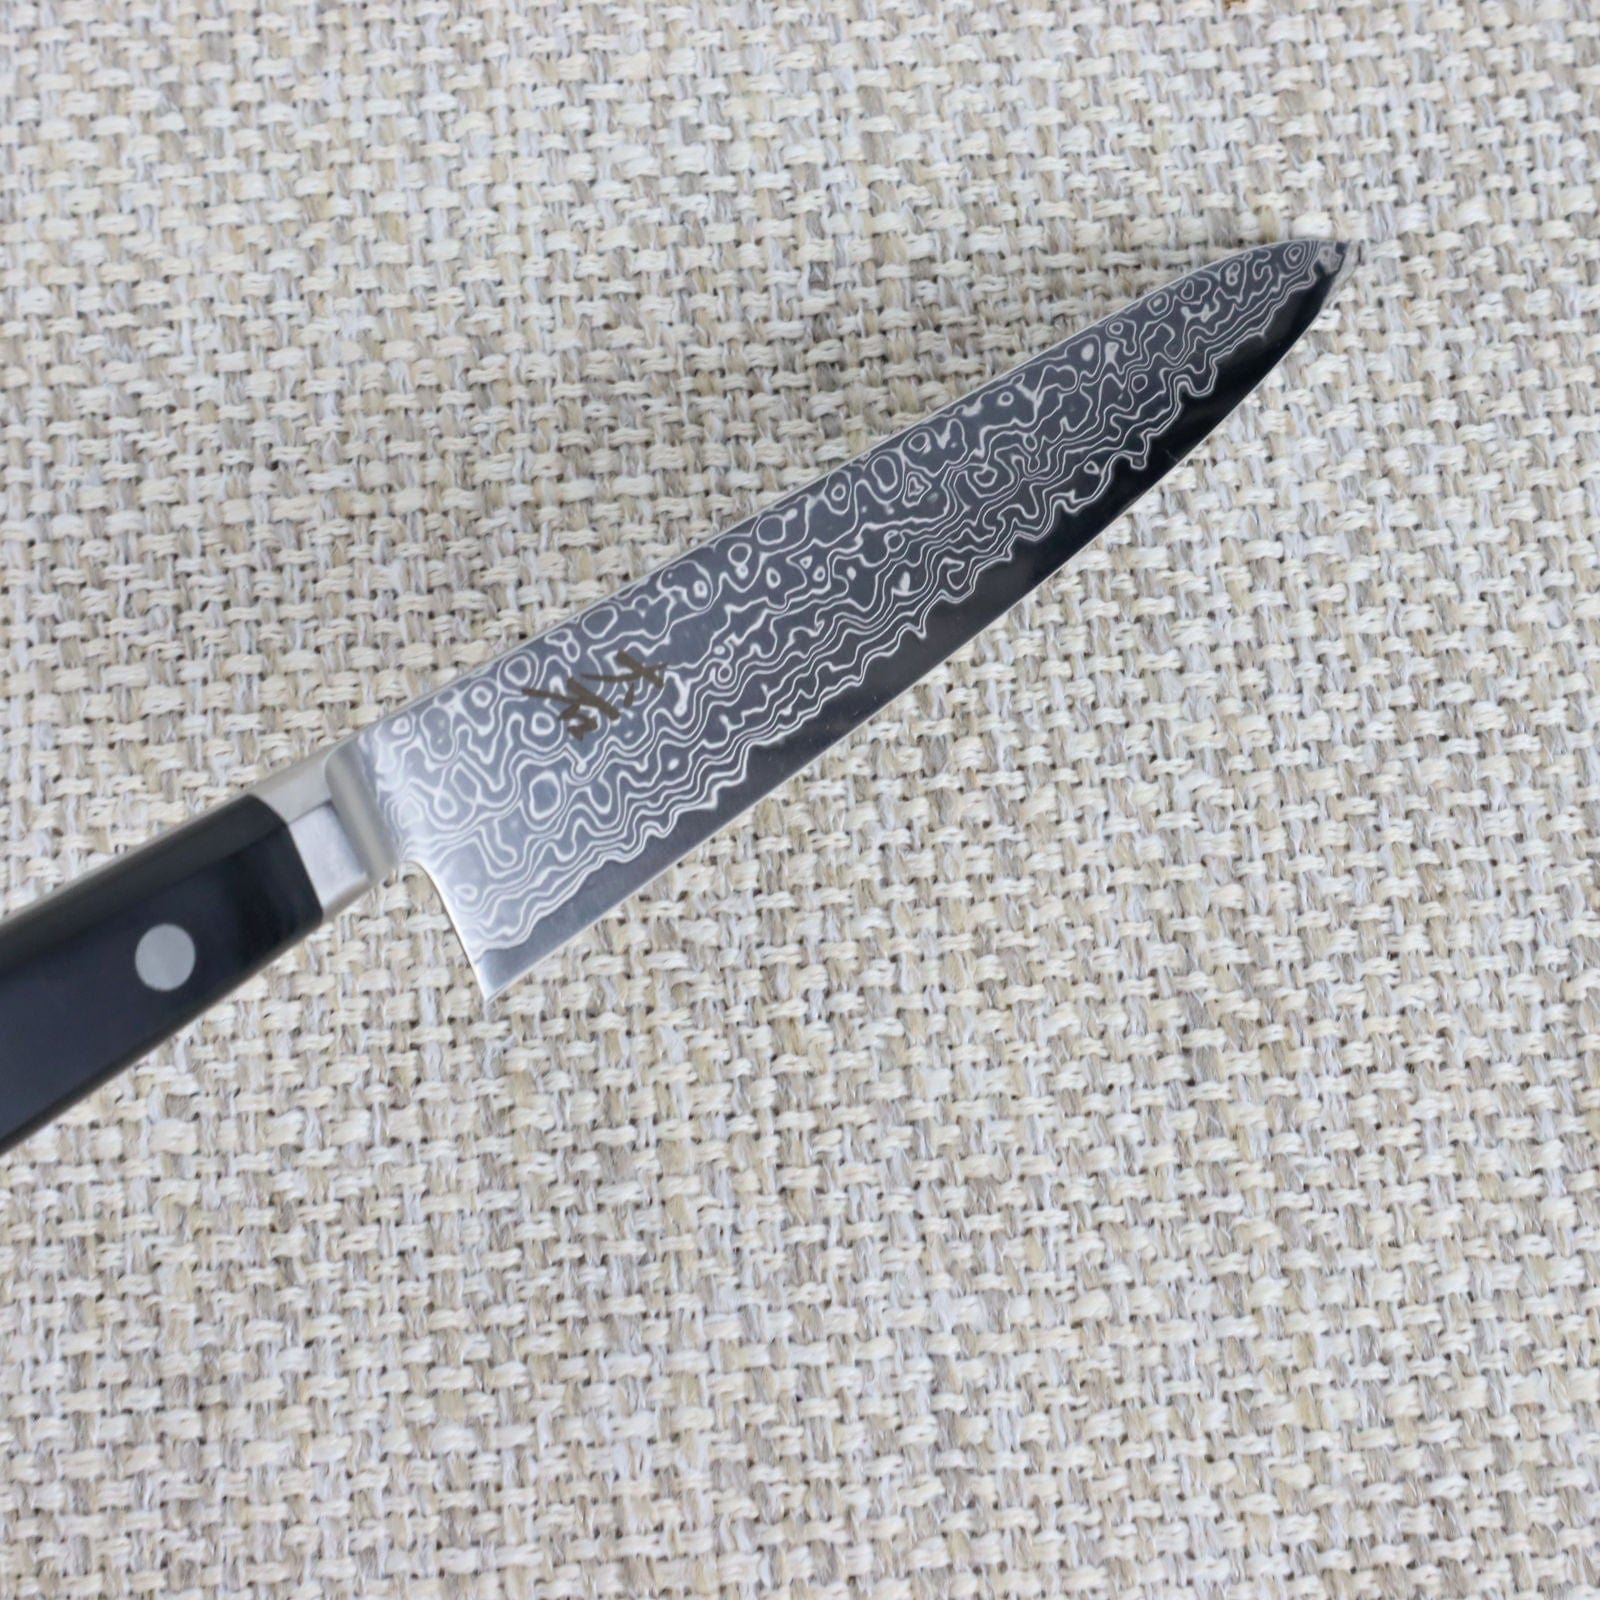 Ohishi Classic Powder Metal Damascus 150mm Petty (Utility) Japanese kitchen knife with the blade angled down to show the integral bolster and the Damascus blade